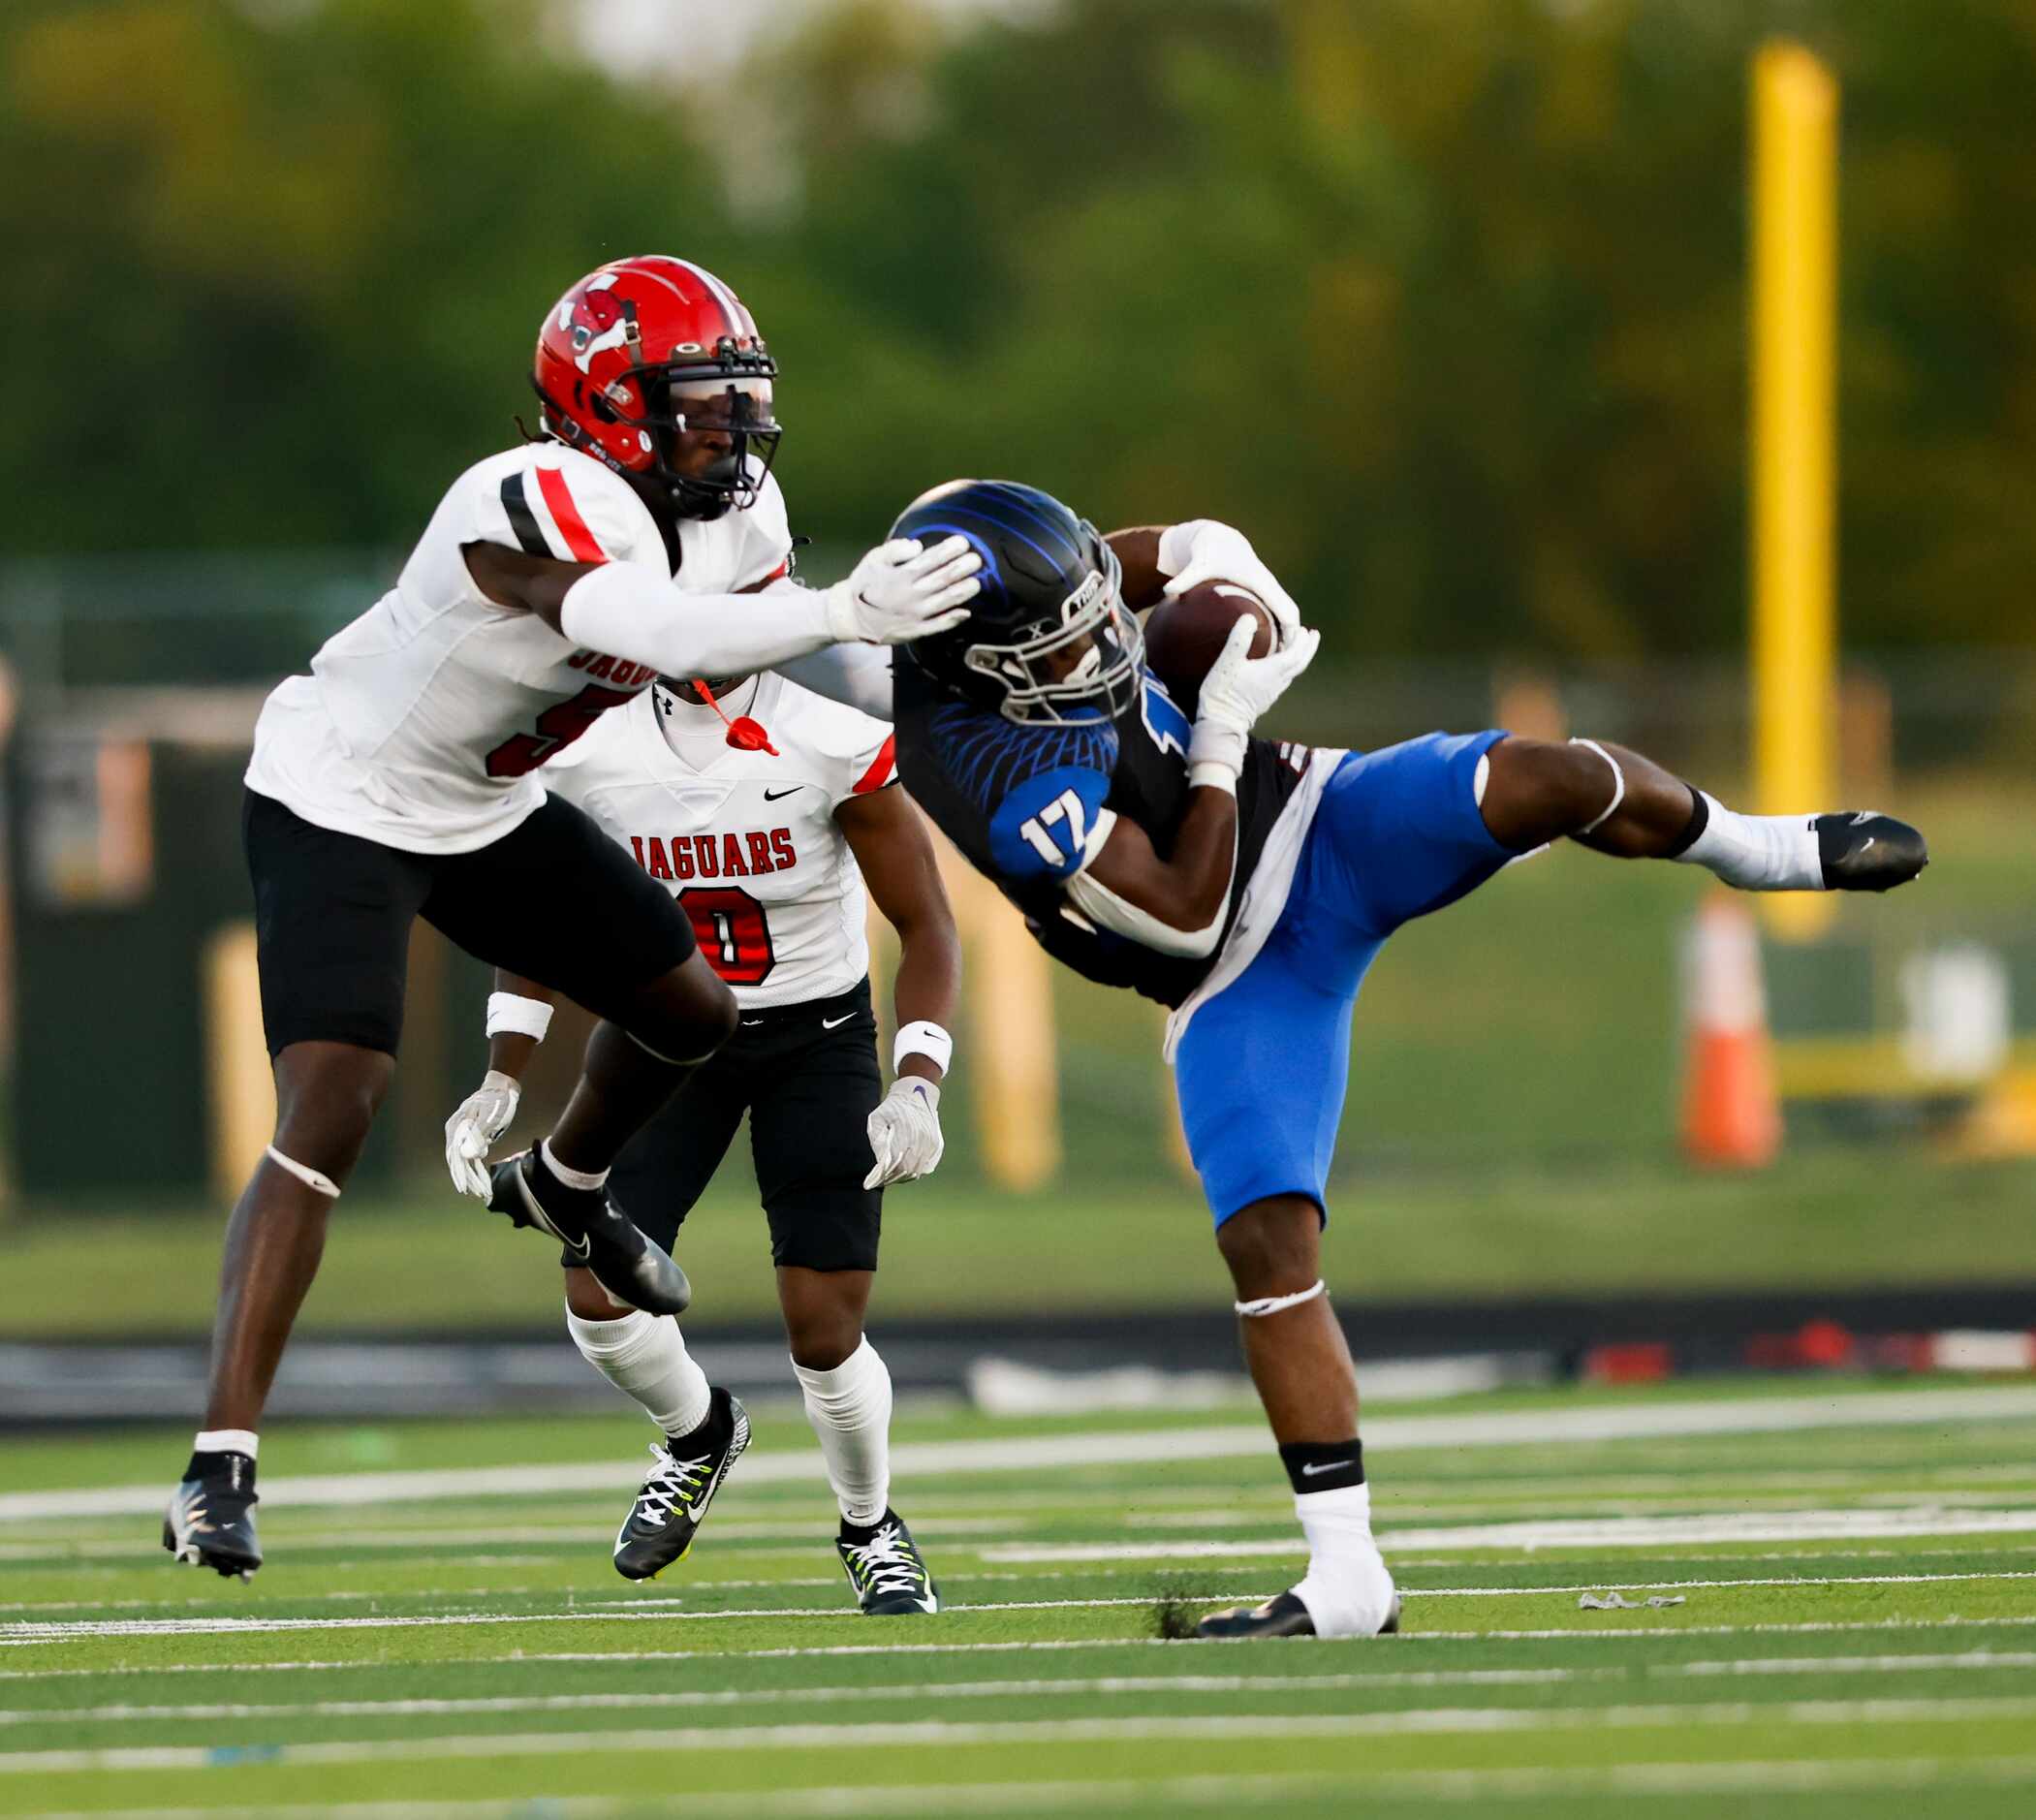 A pass is complete to North Forney’s Kamariun Shaw (17) as Mesquite Horn’s defensive back...